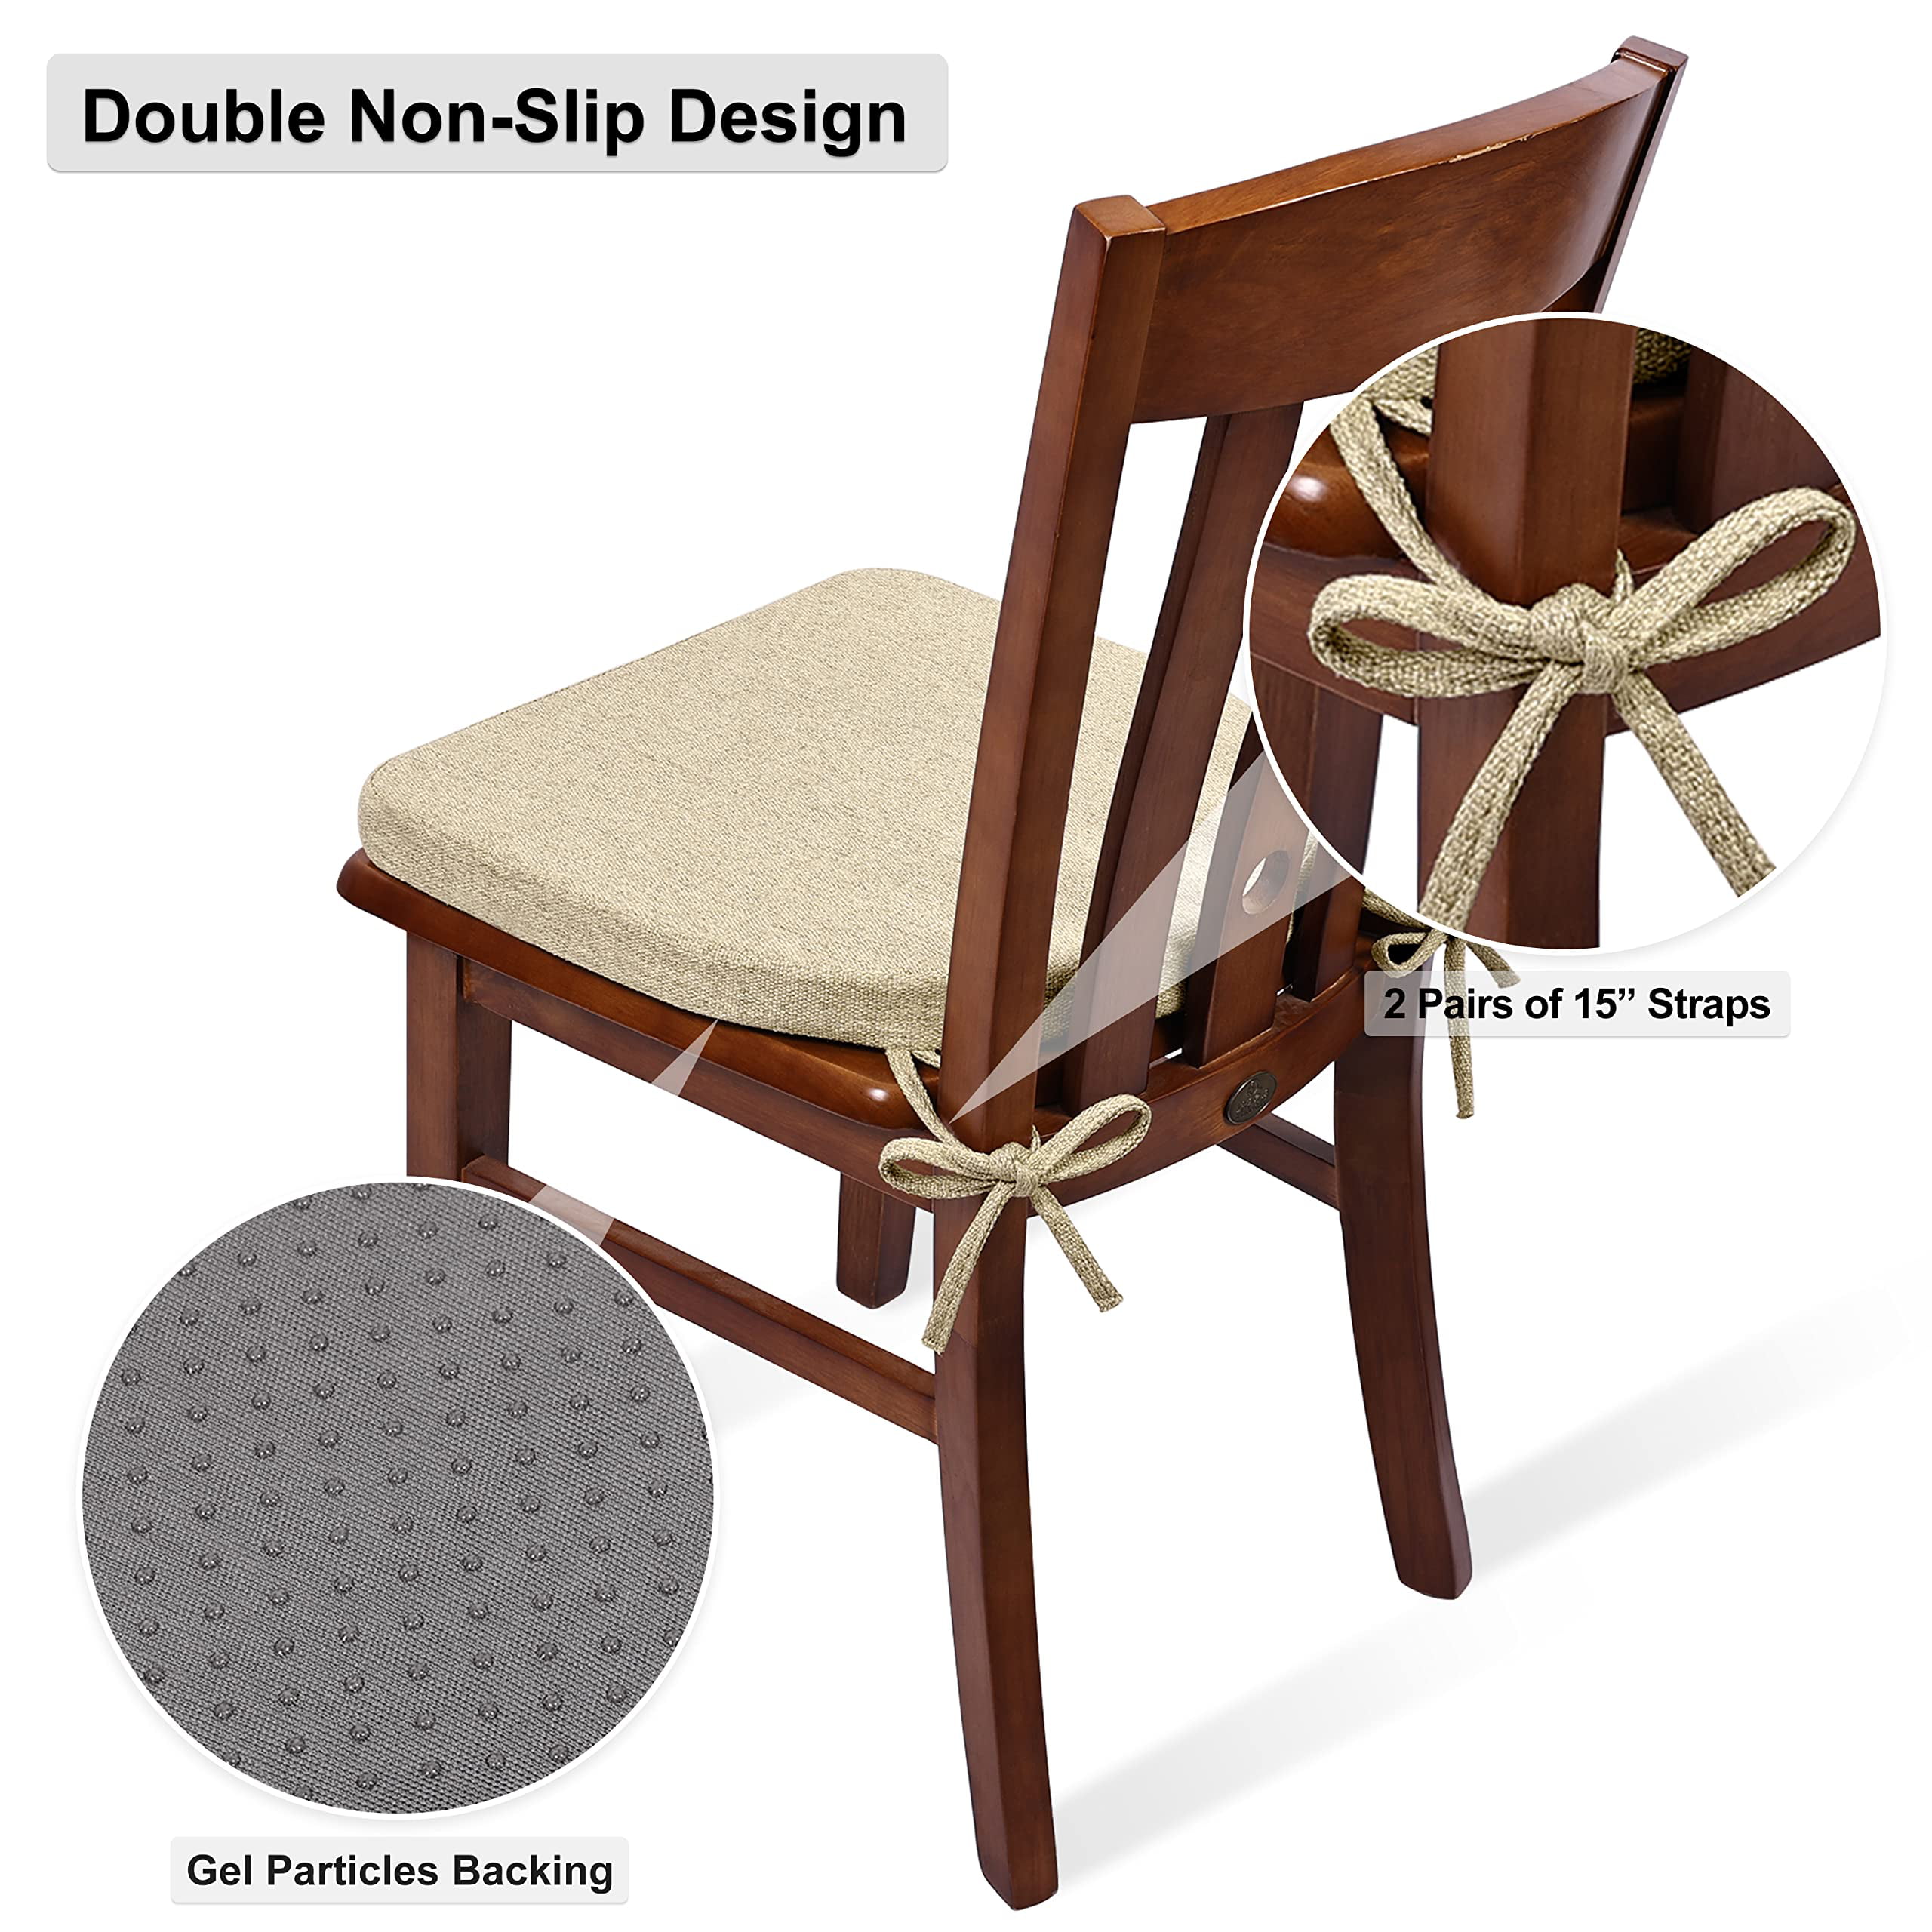 Walbest 15.75 x 15.75 Dining Chair Cushion, Soft Chair Pad Seat Cushion,  Tie on Seat for Non-Slip Support, Durable, Superior Comfort and Softness,  Reduces Pressure, Washable, Living Room Decoration 